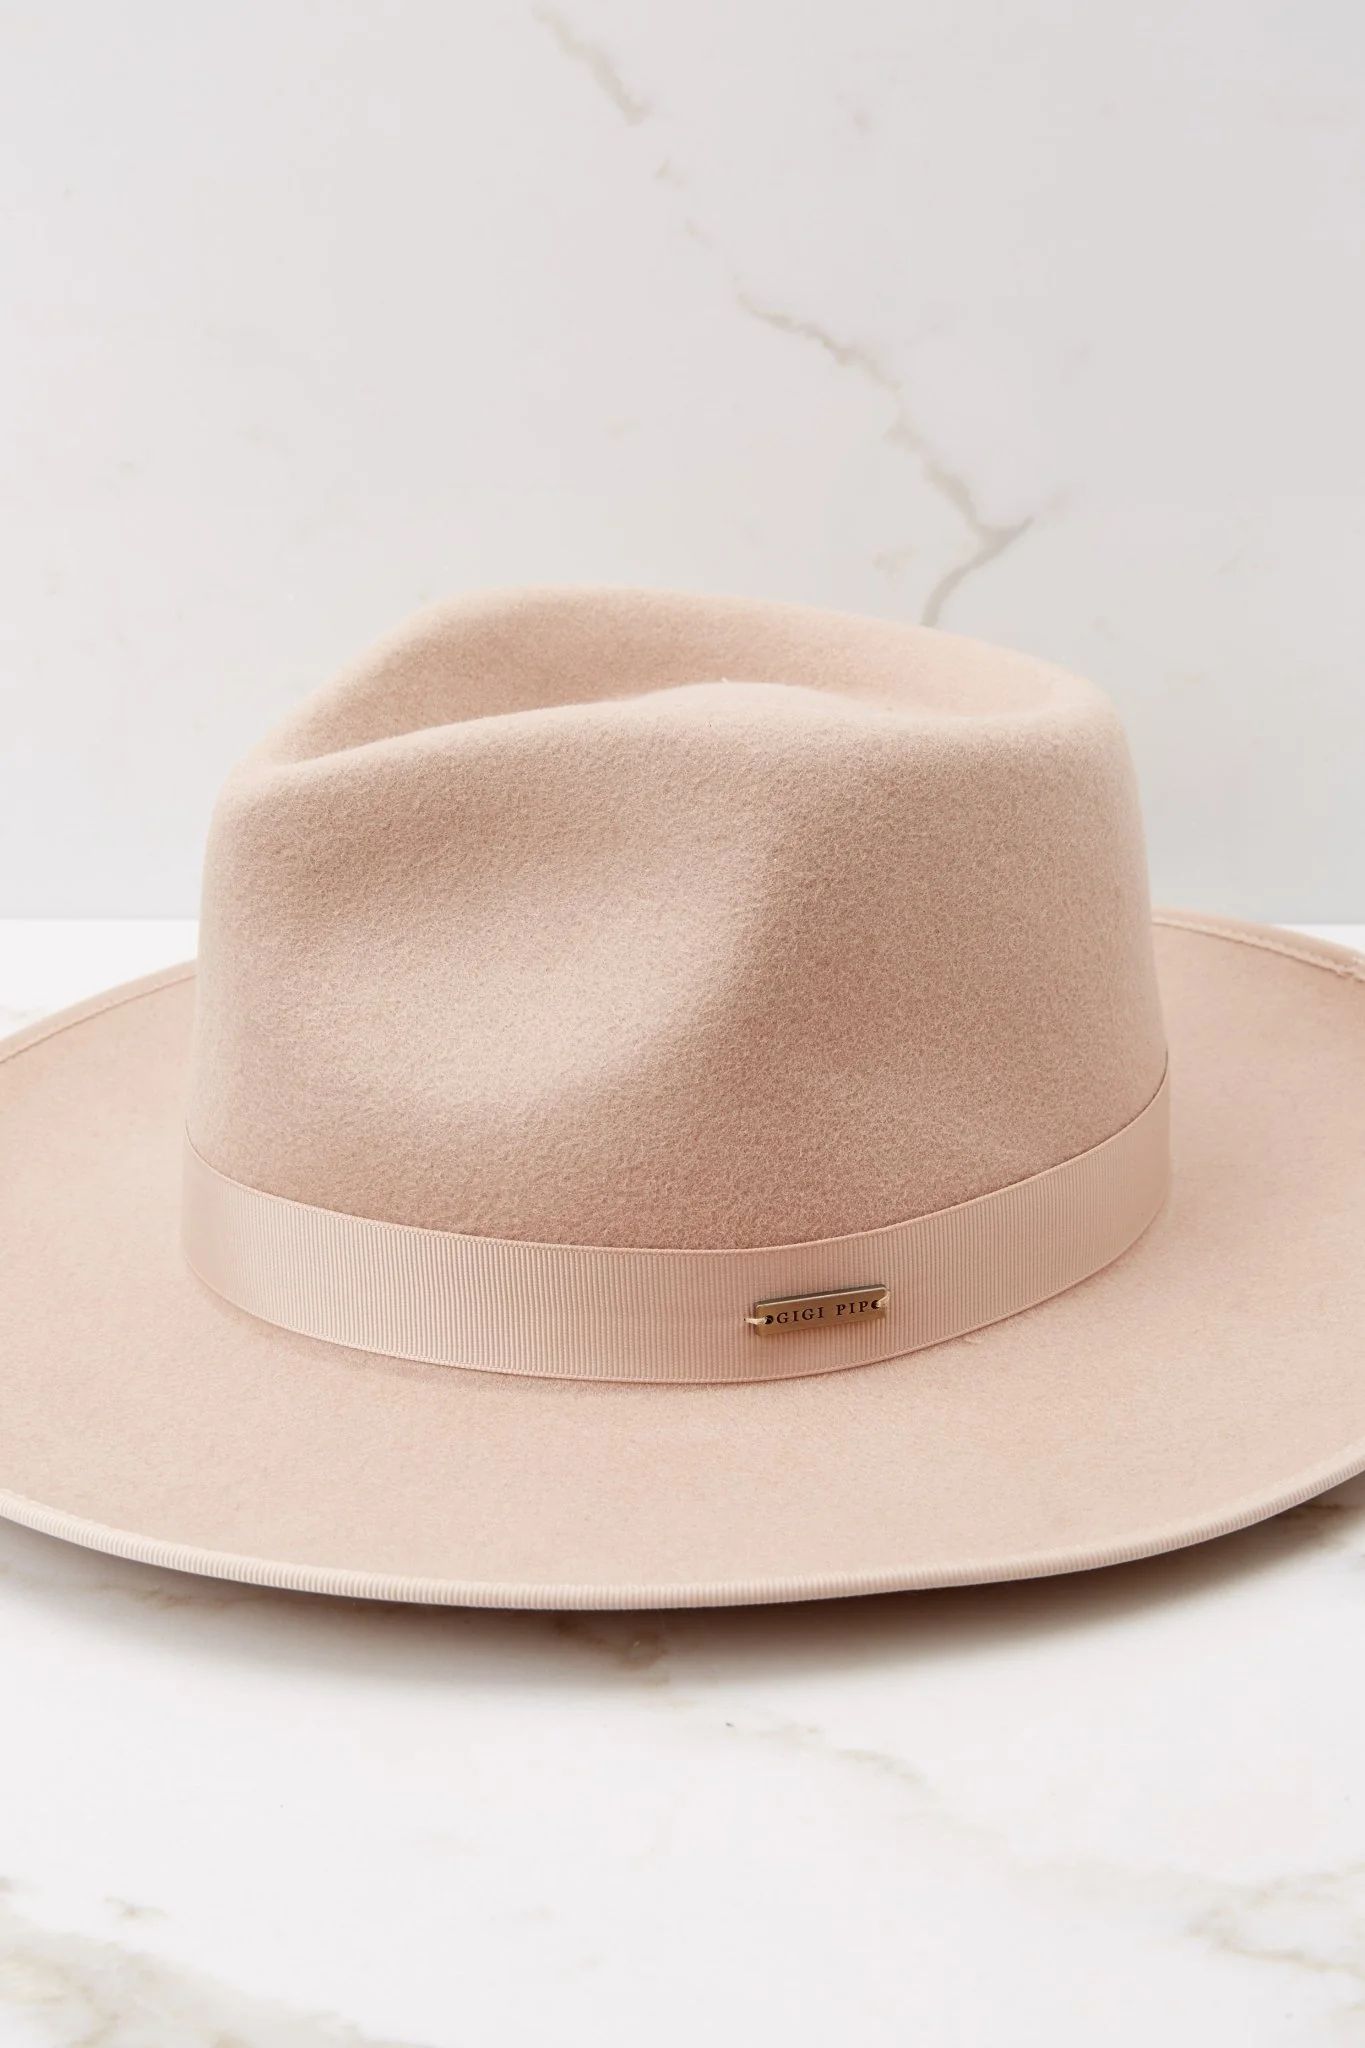 Monroe Nude Rancher Hat | Red Dress 